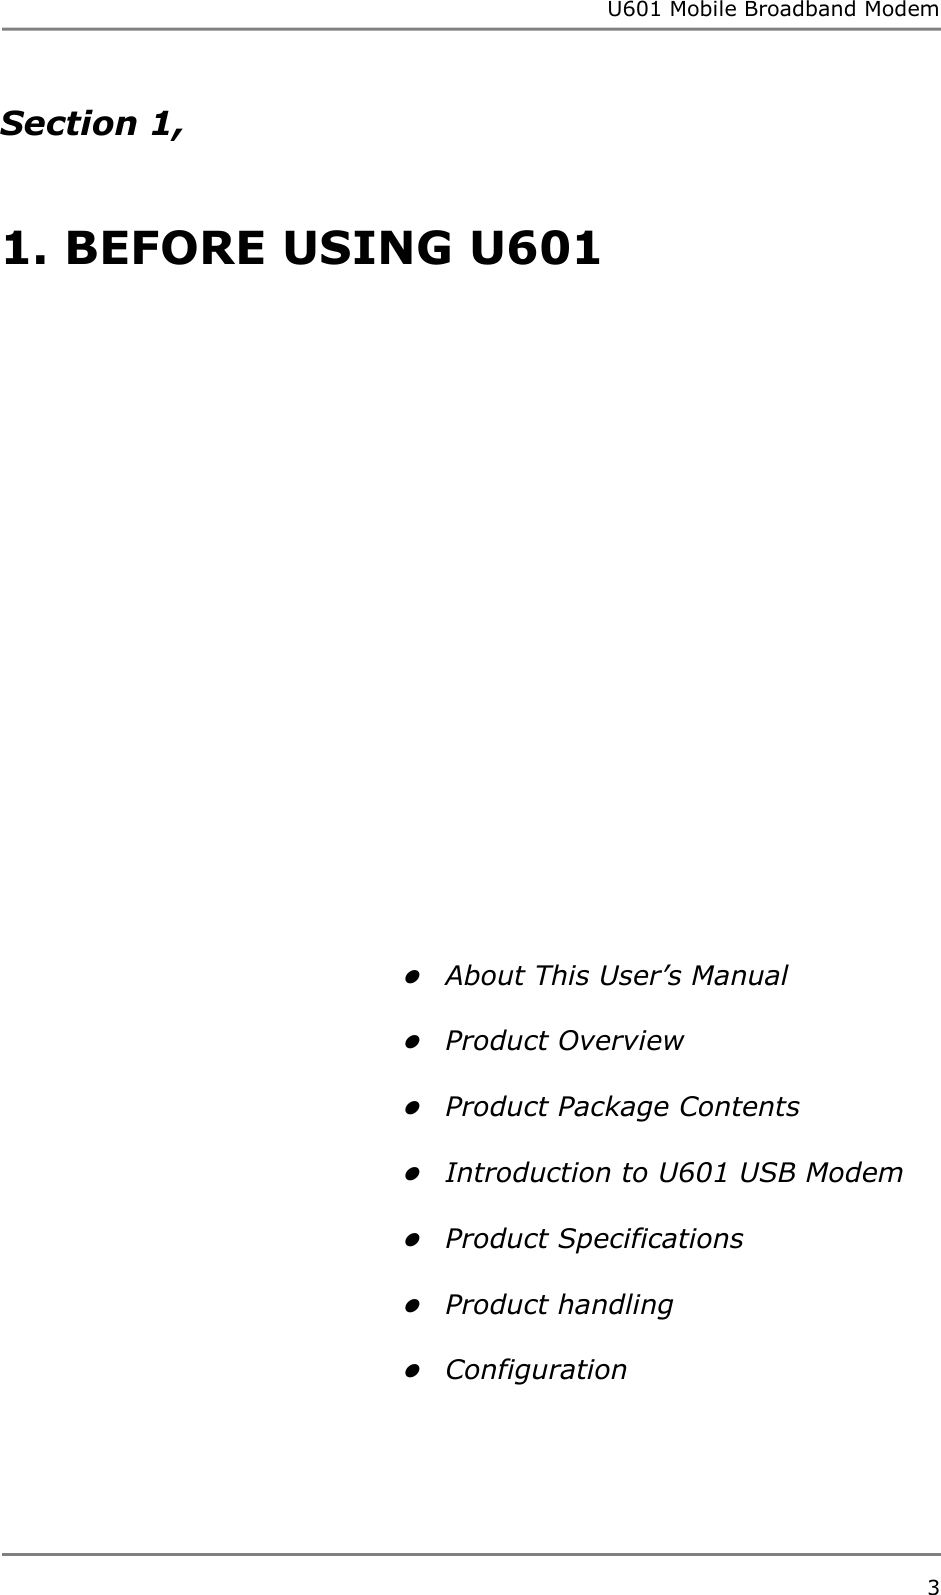 U601 Mobile Broadband Modem 3  Section 1,    1. BEFORE USING U601                              About This User’s Manual   Product Overview   Product Package Contents   Introduction to U601 USB Modem   Product Specifications   Product handling   Configuration      